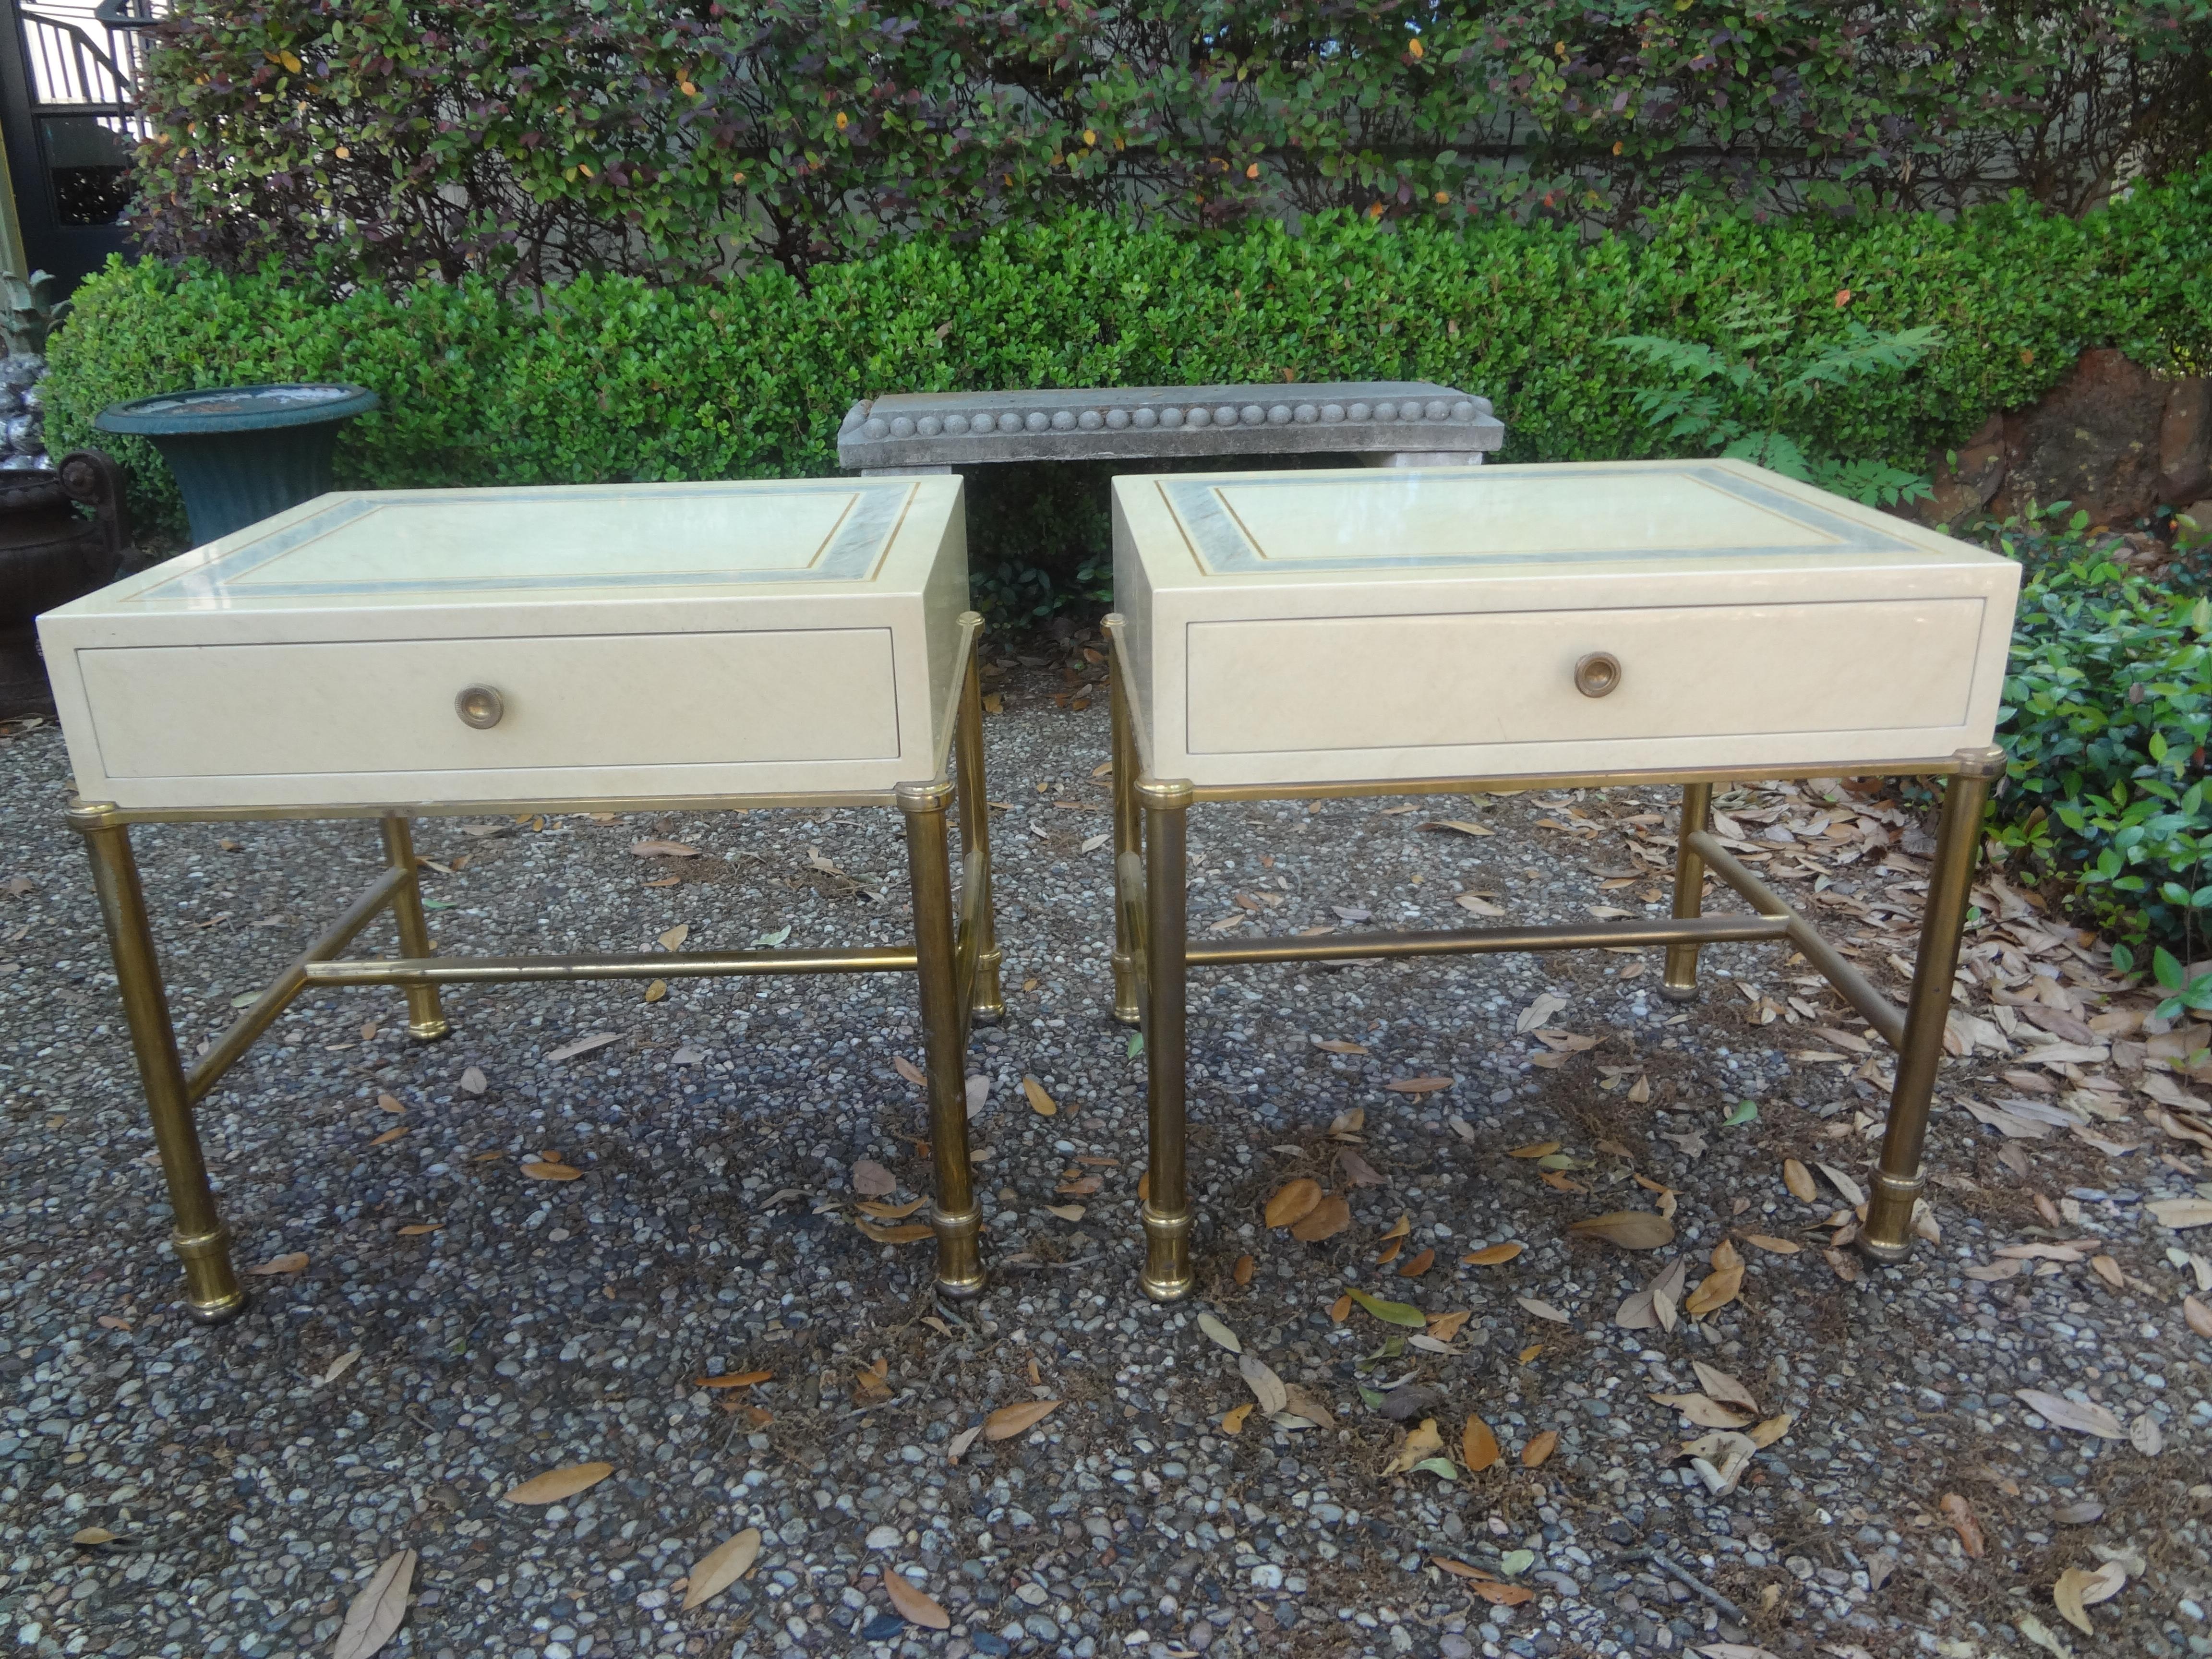 Pair of Italian modern brass and lacquered tables attributed To Willy Rizzo.
This stunning pair of Italian Willy Rizzo style Hollywood Regency side tables, nightstands or bedside tables have brass bases, lacquered tops and drawers.
These well made